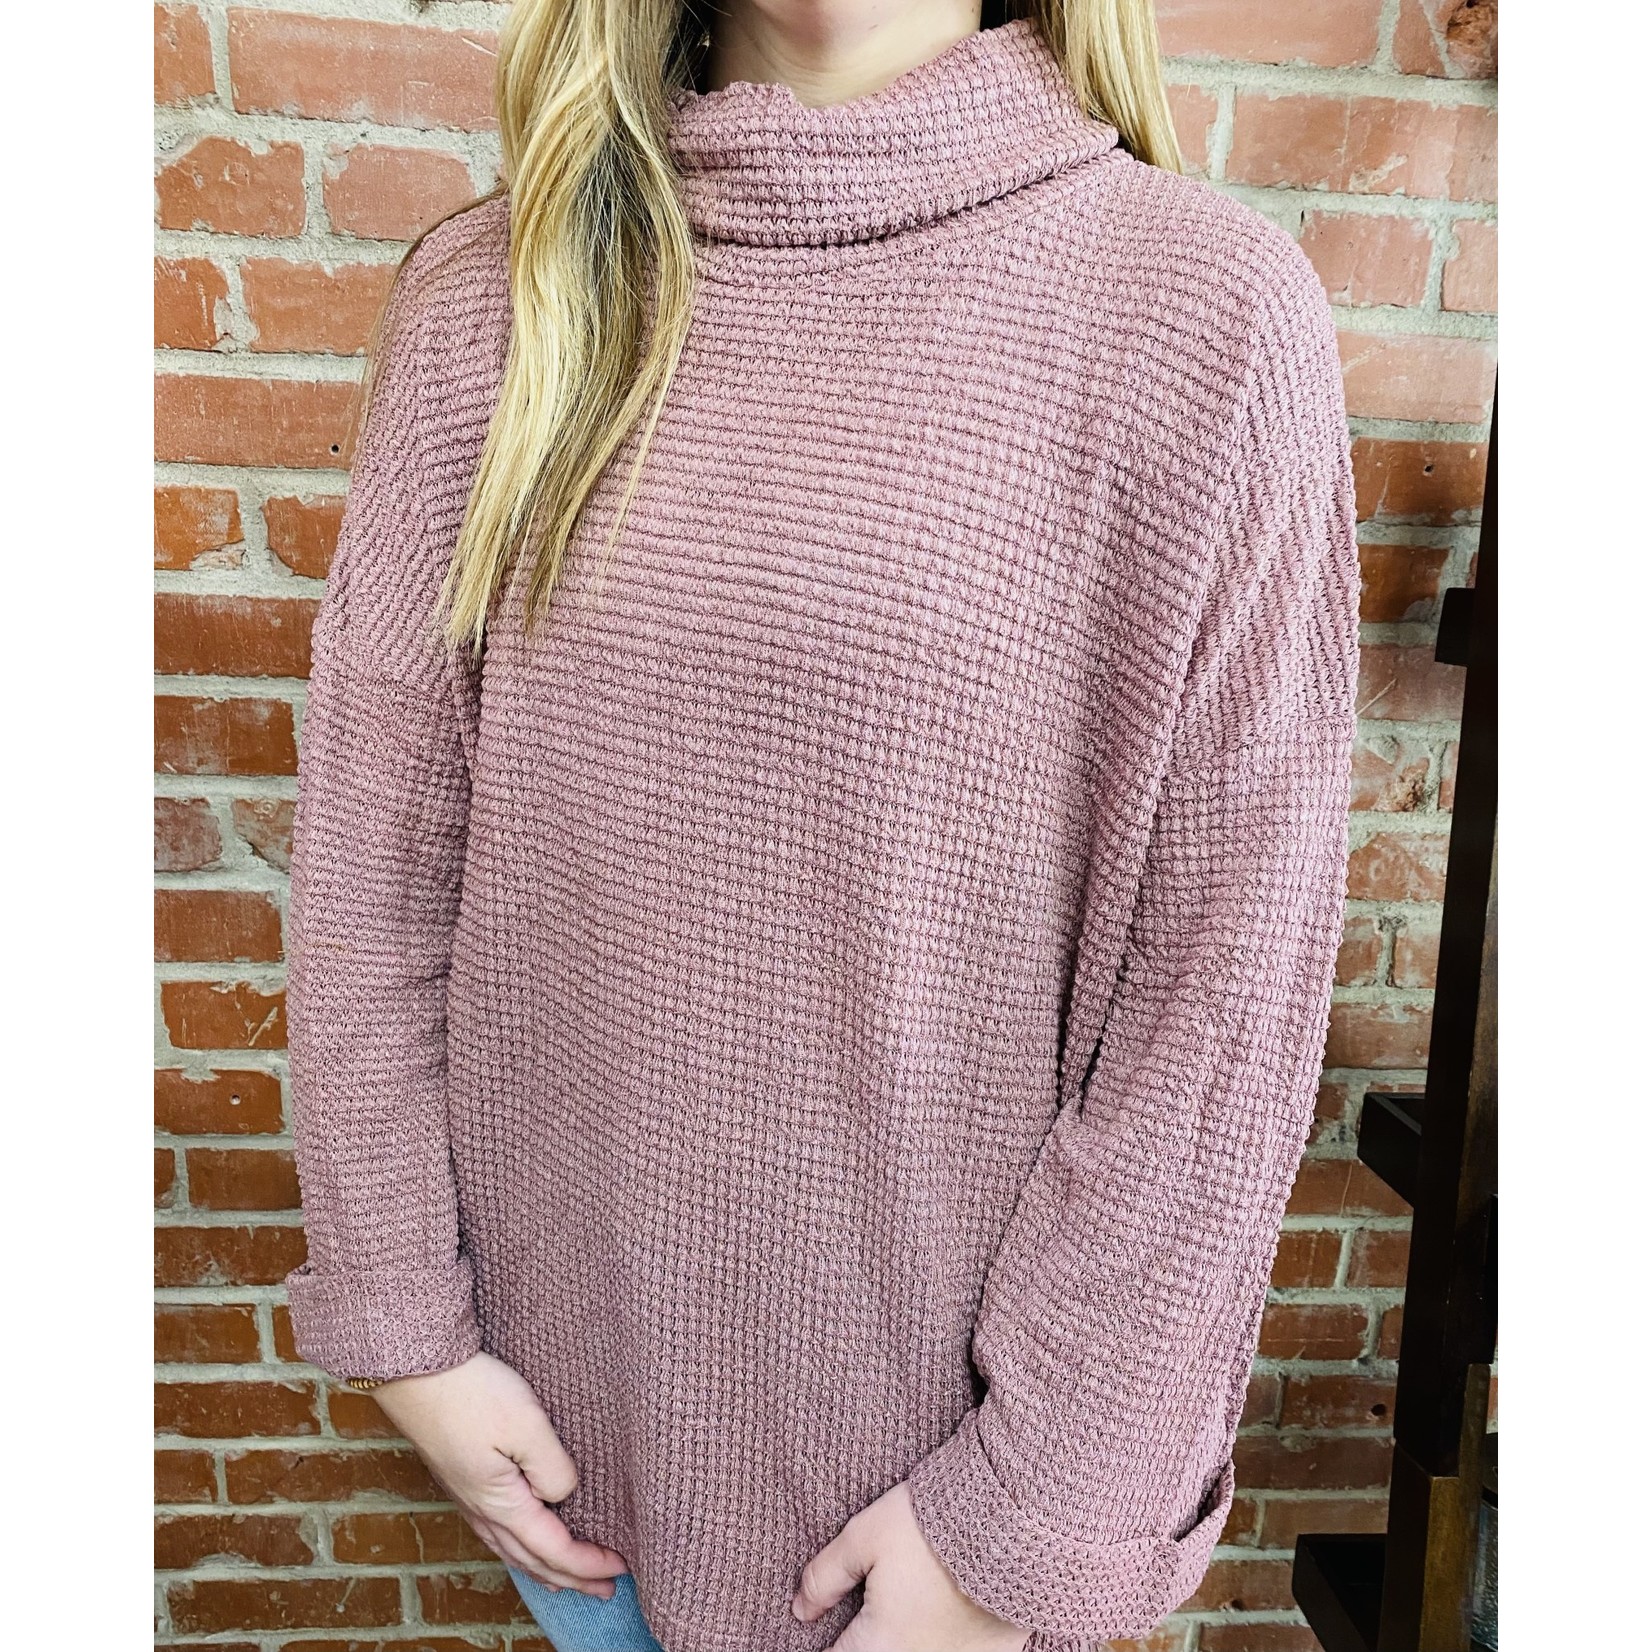 She + Sky Long Cuff Sleeve Turtle Neck Thermal Top